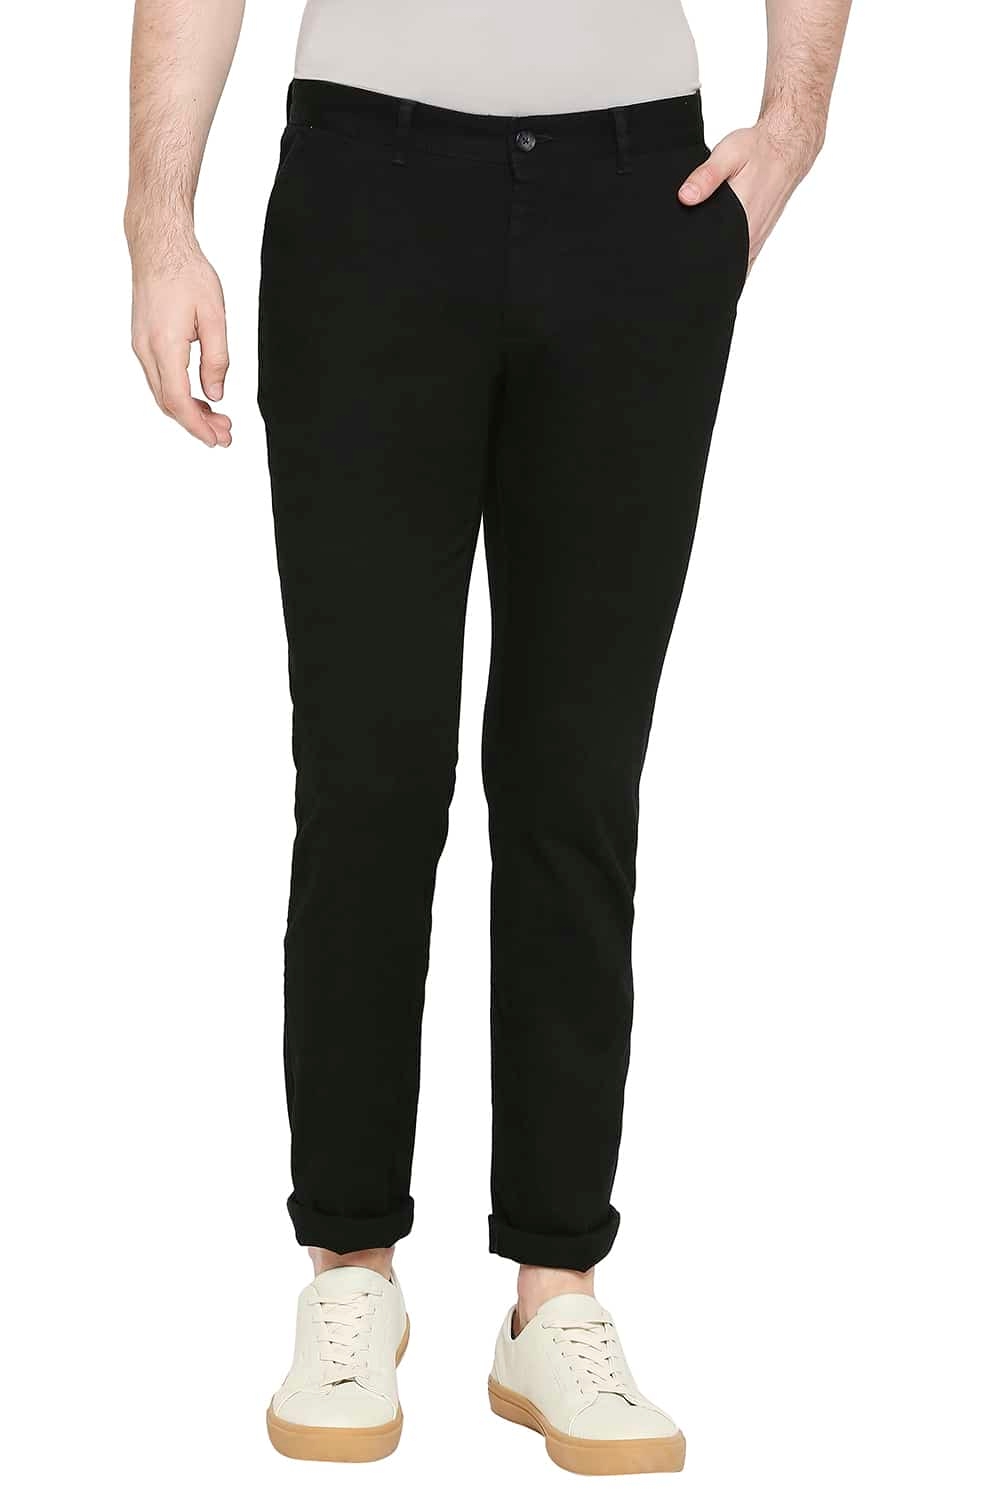 Basics | Basics Tapered Fit Stretch Limo Black Stretch Trousers